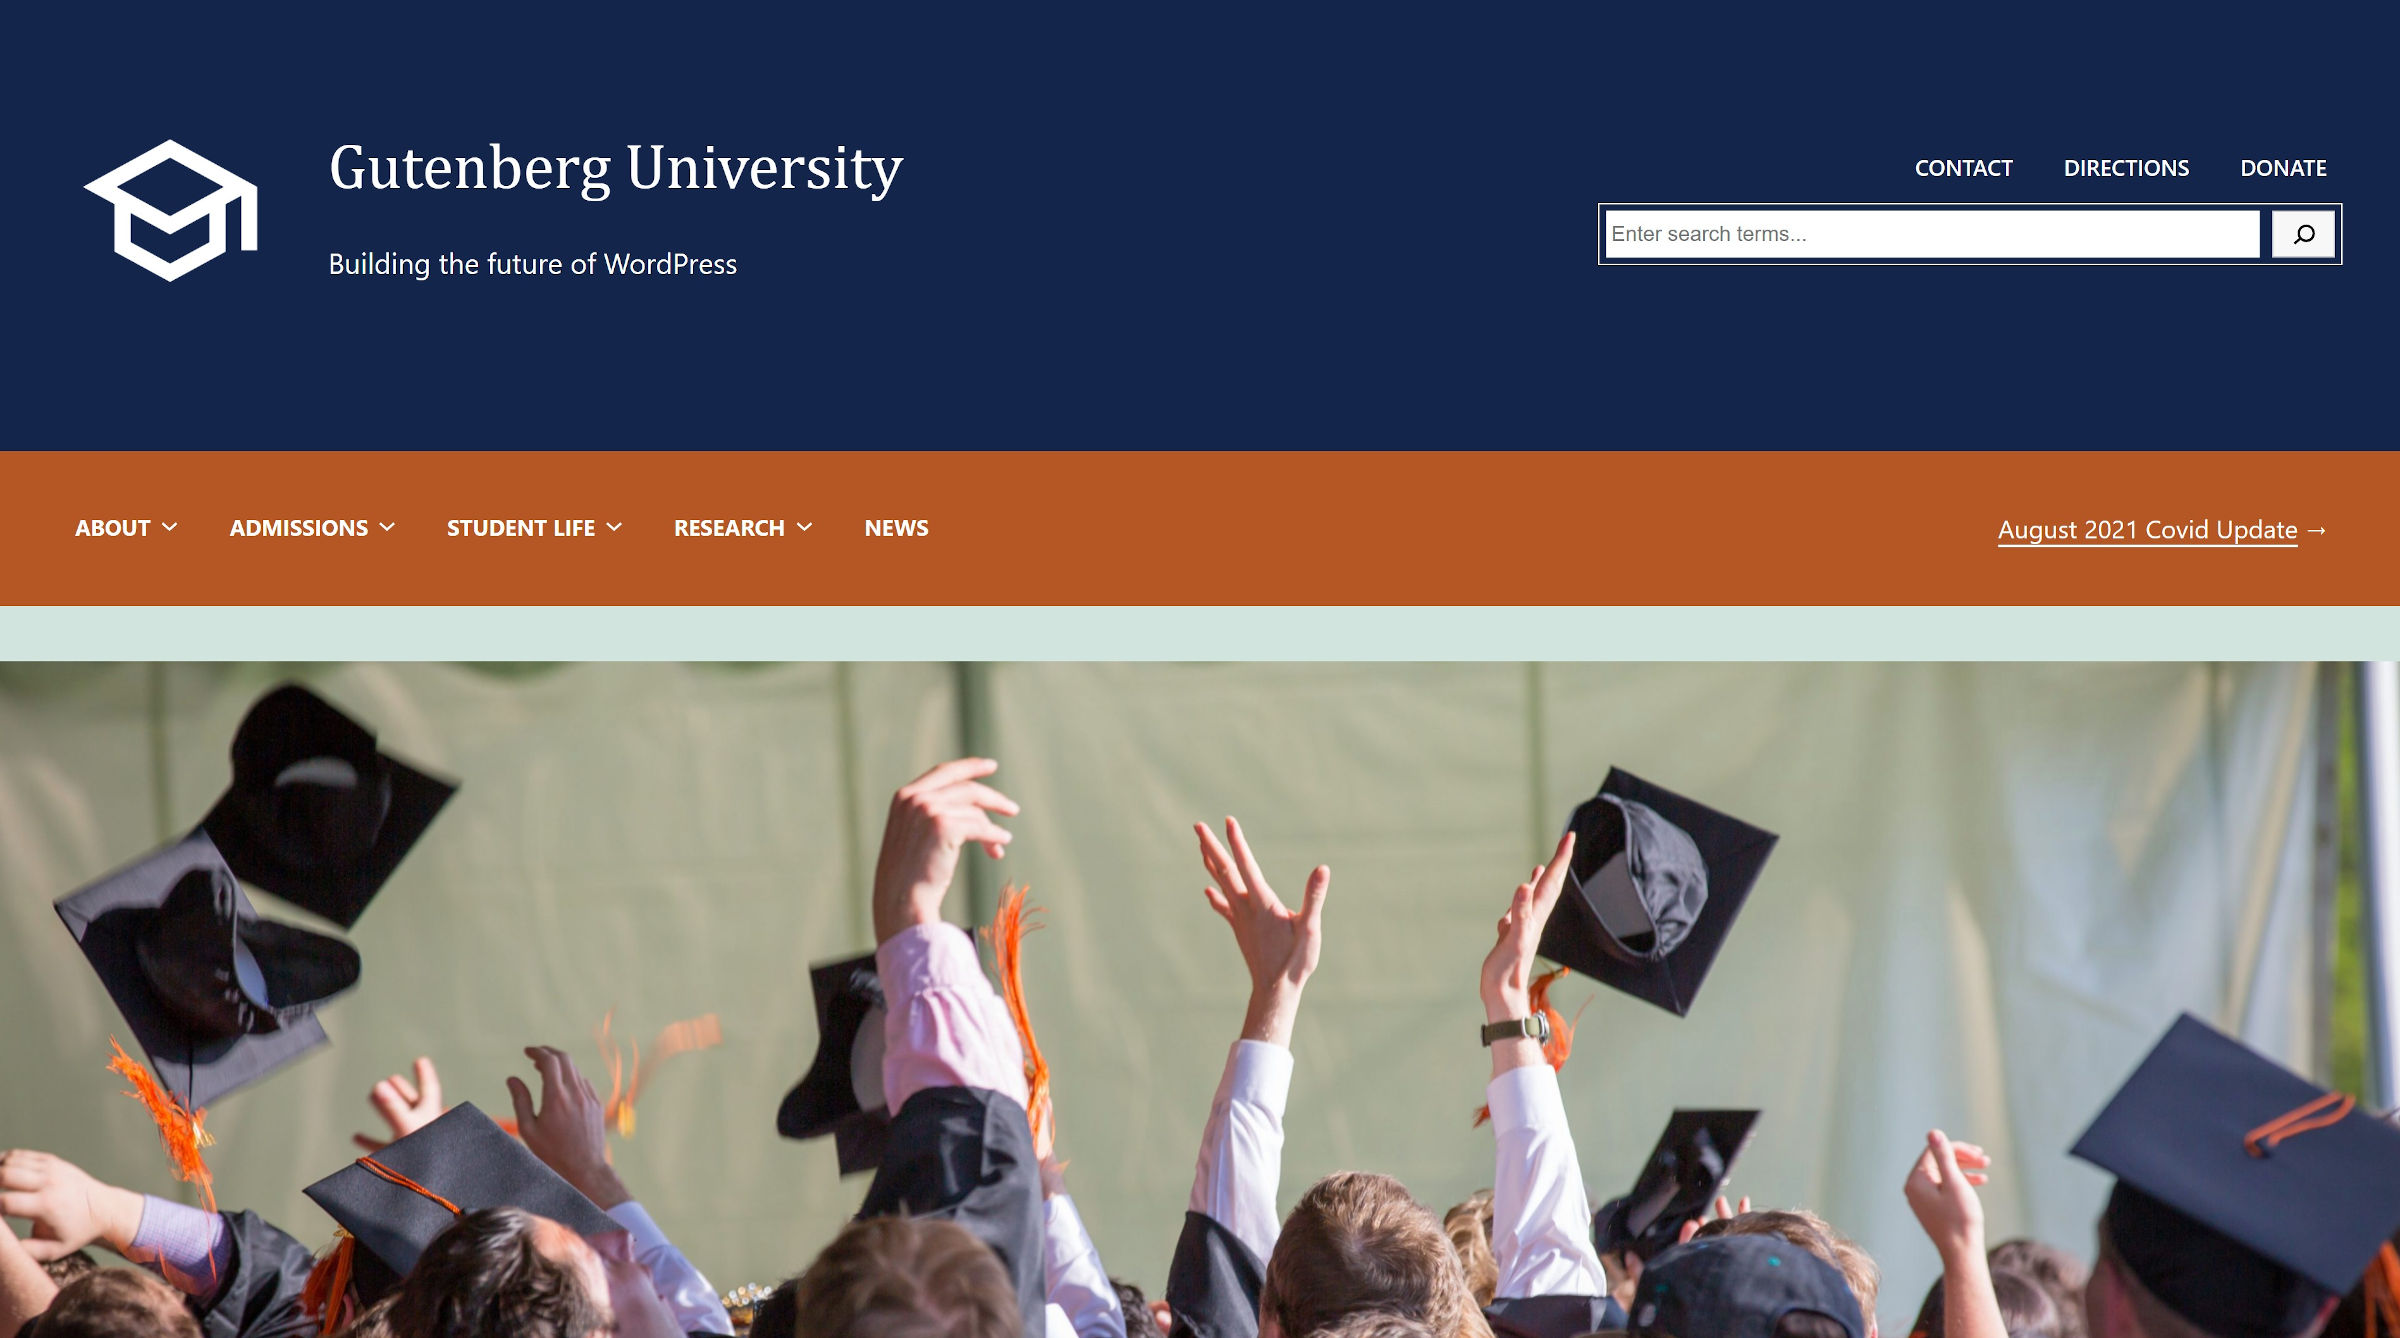 Fictional university website header with logo, title, navigation, search, and image.